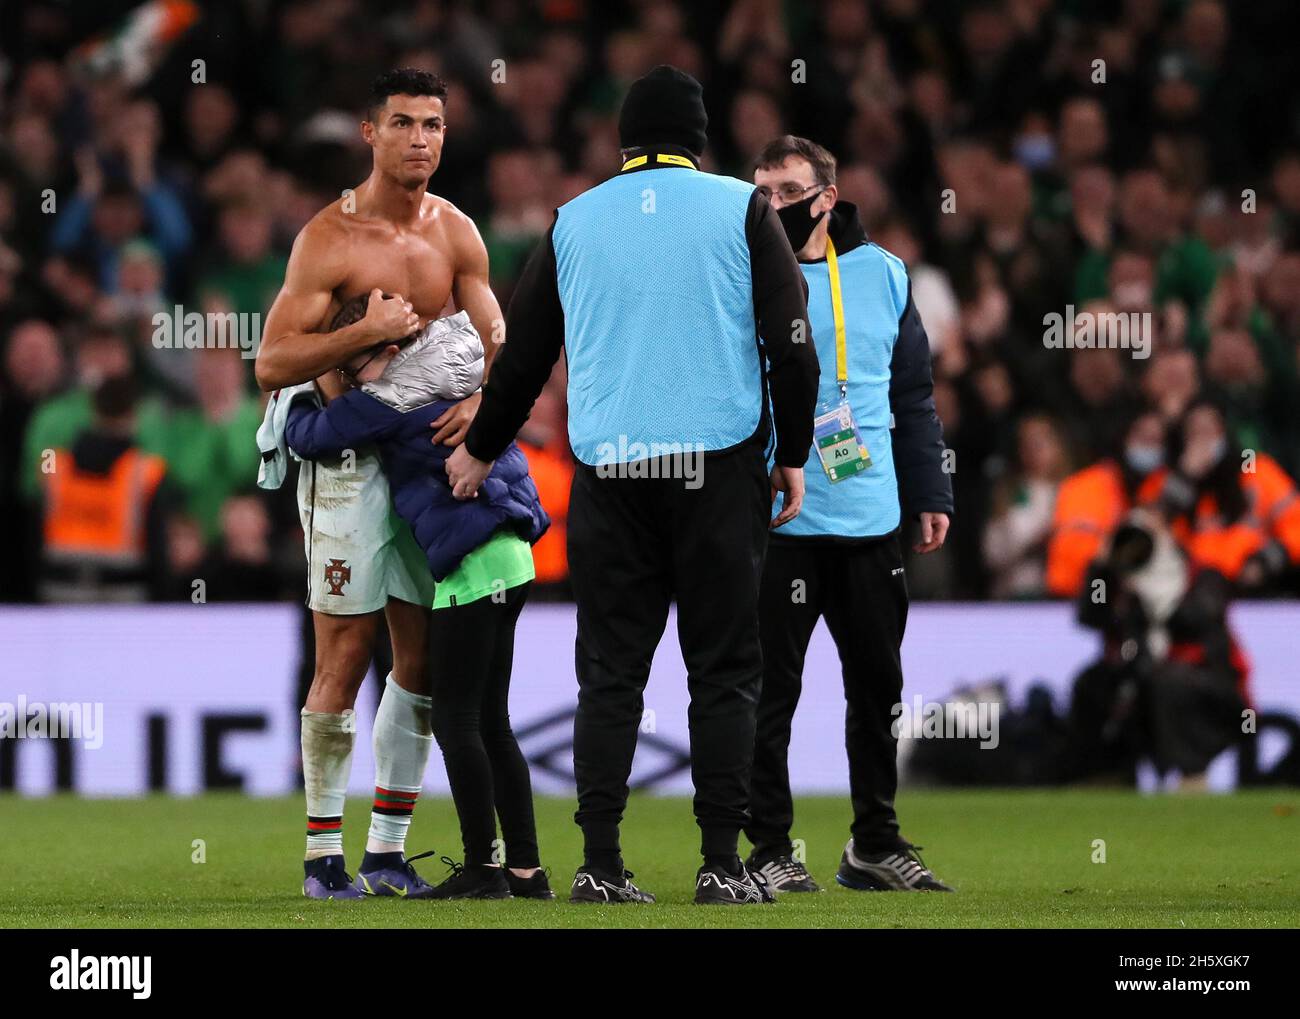 Portugal's Cristiano Ronaldo gives his shirt to a young Republic of Ireland  fan who ran onto the pitch after the FIFA World Cup Qualifying match at the  Aviva Stadium, Dublin. Picture date: